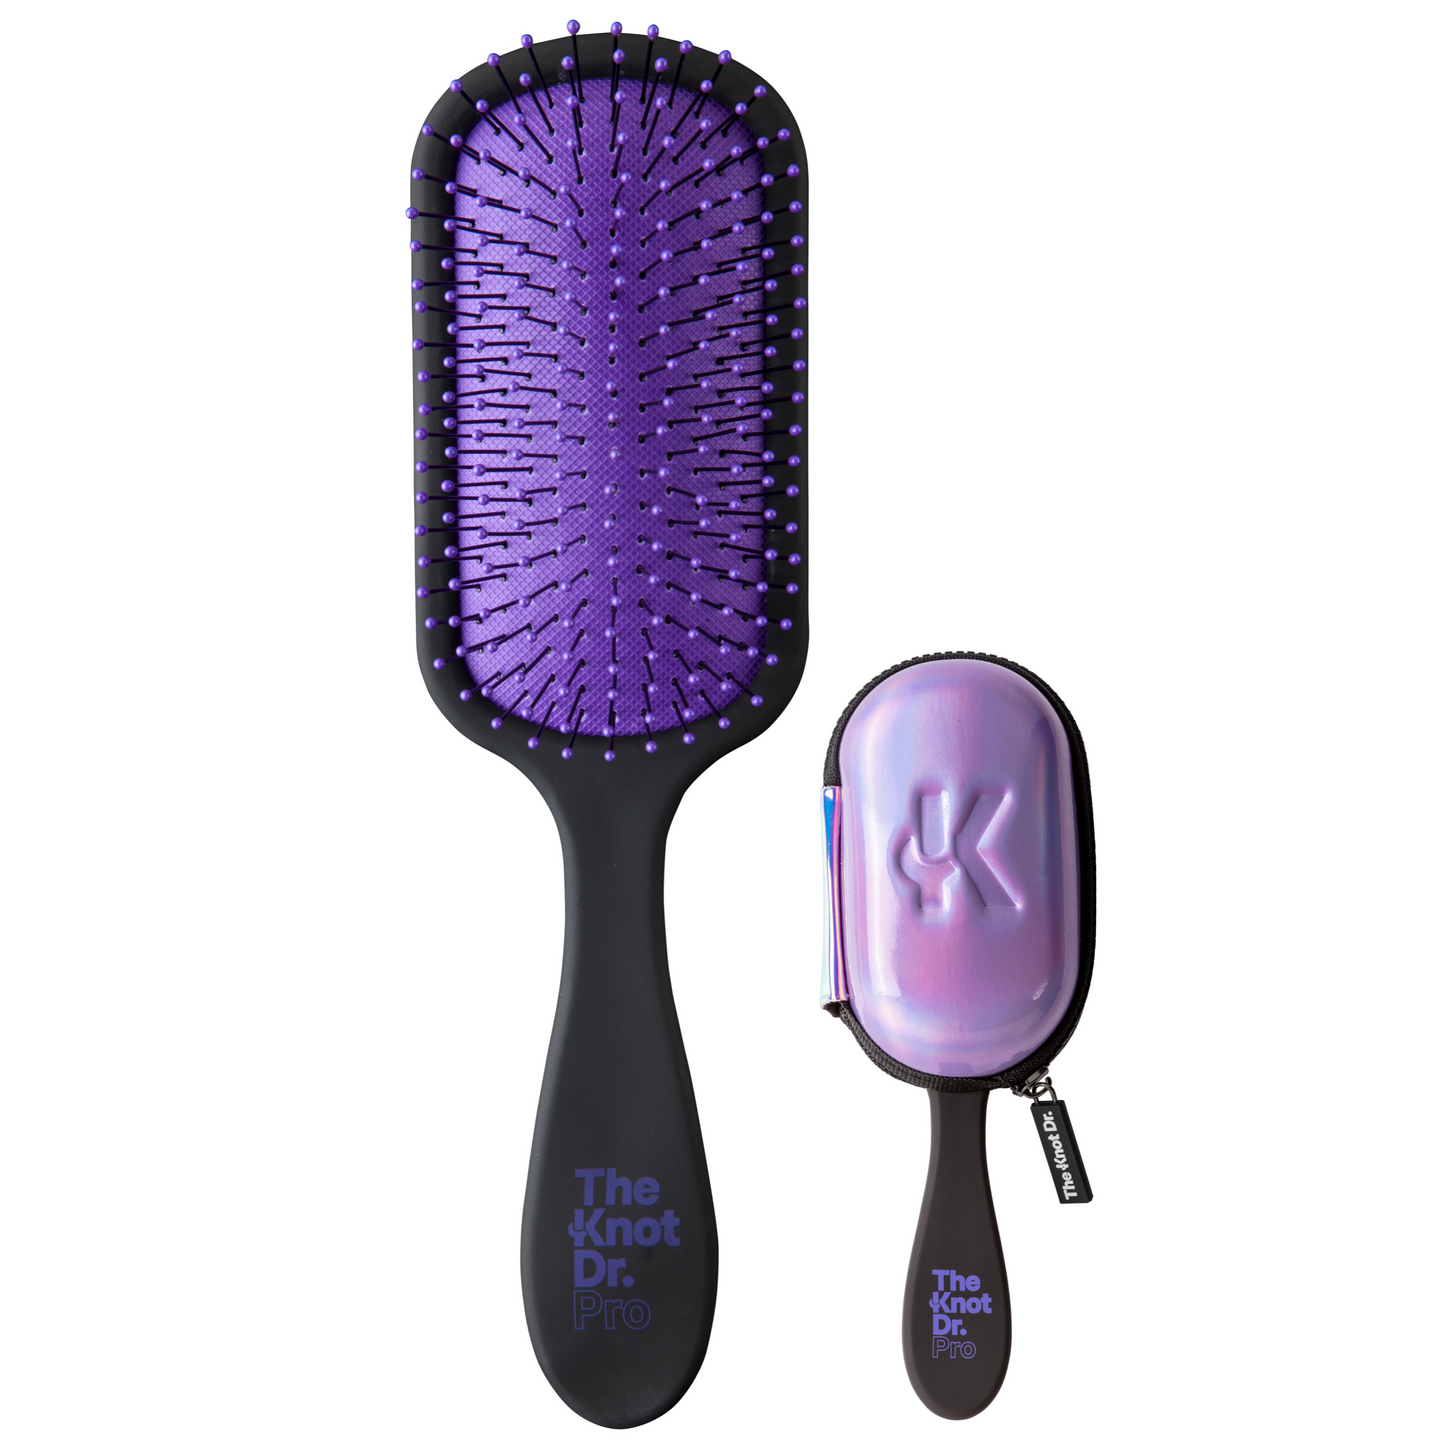 Black detangling brush with purple pad and purple holographic protector head case